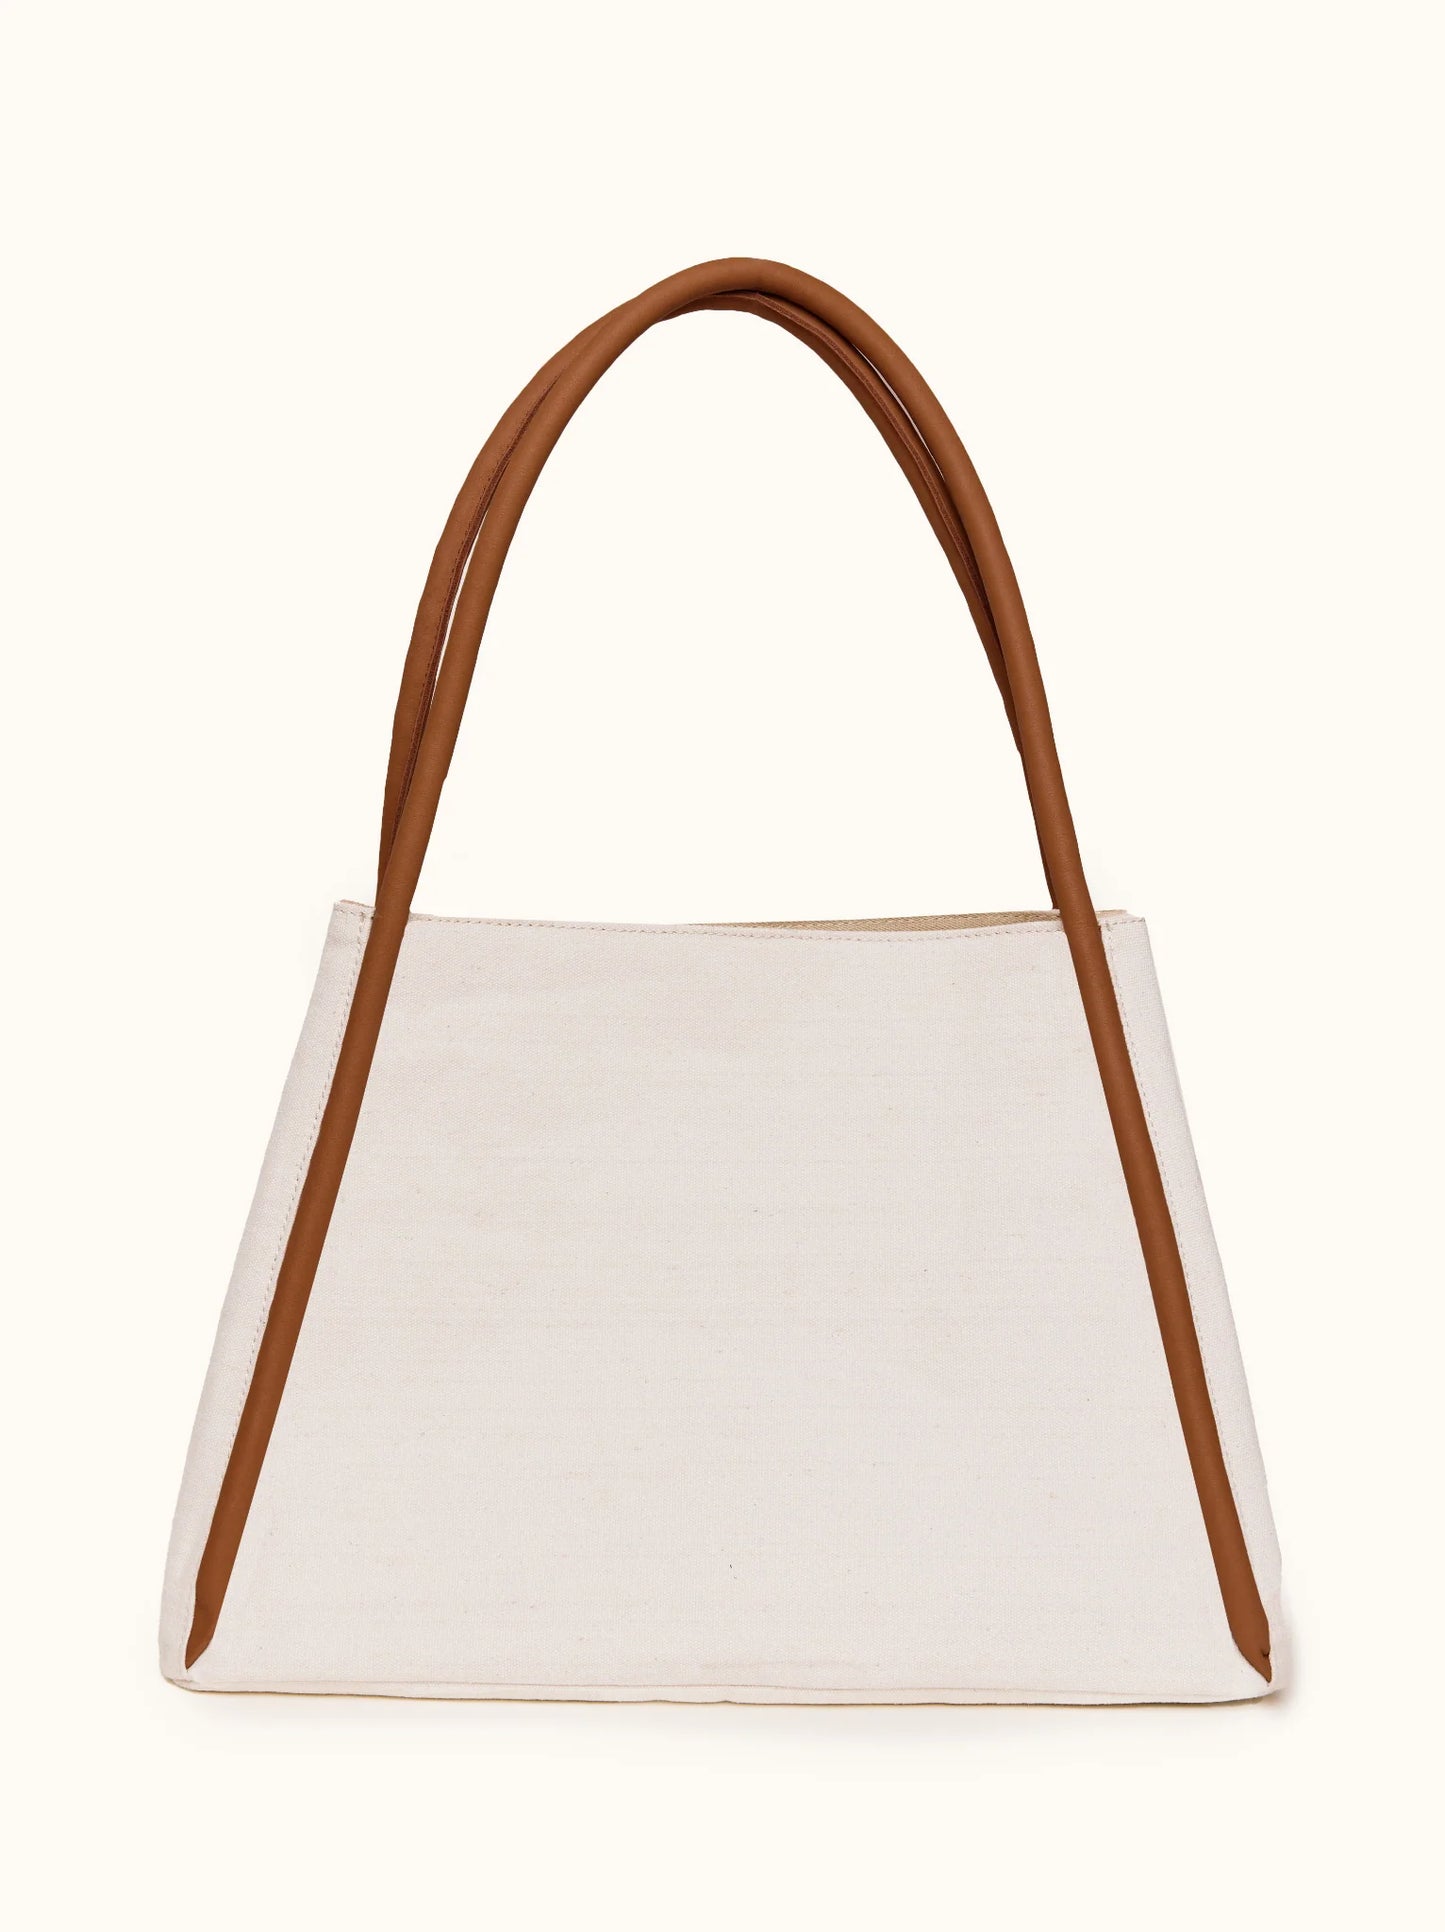 Able Abilene Shoulder Bag Totes in Canvas/Whiskey at Wrapsody